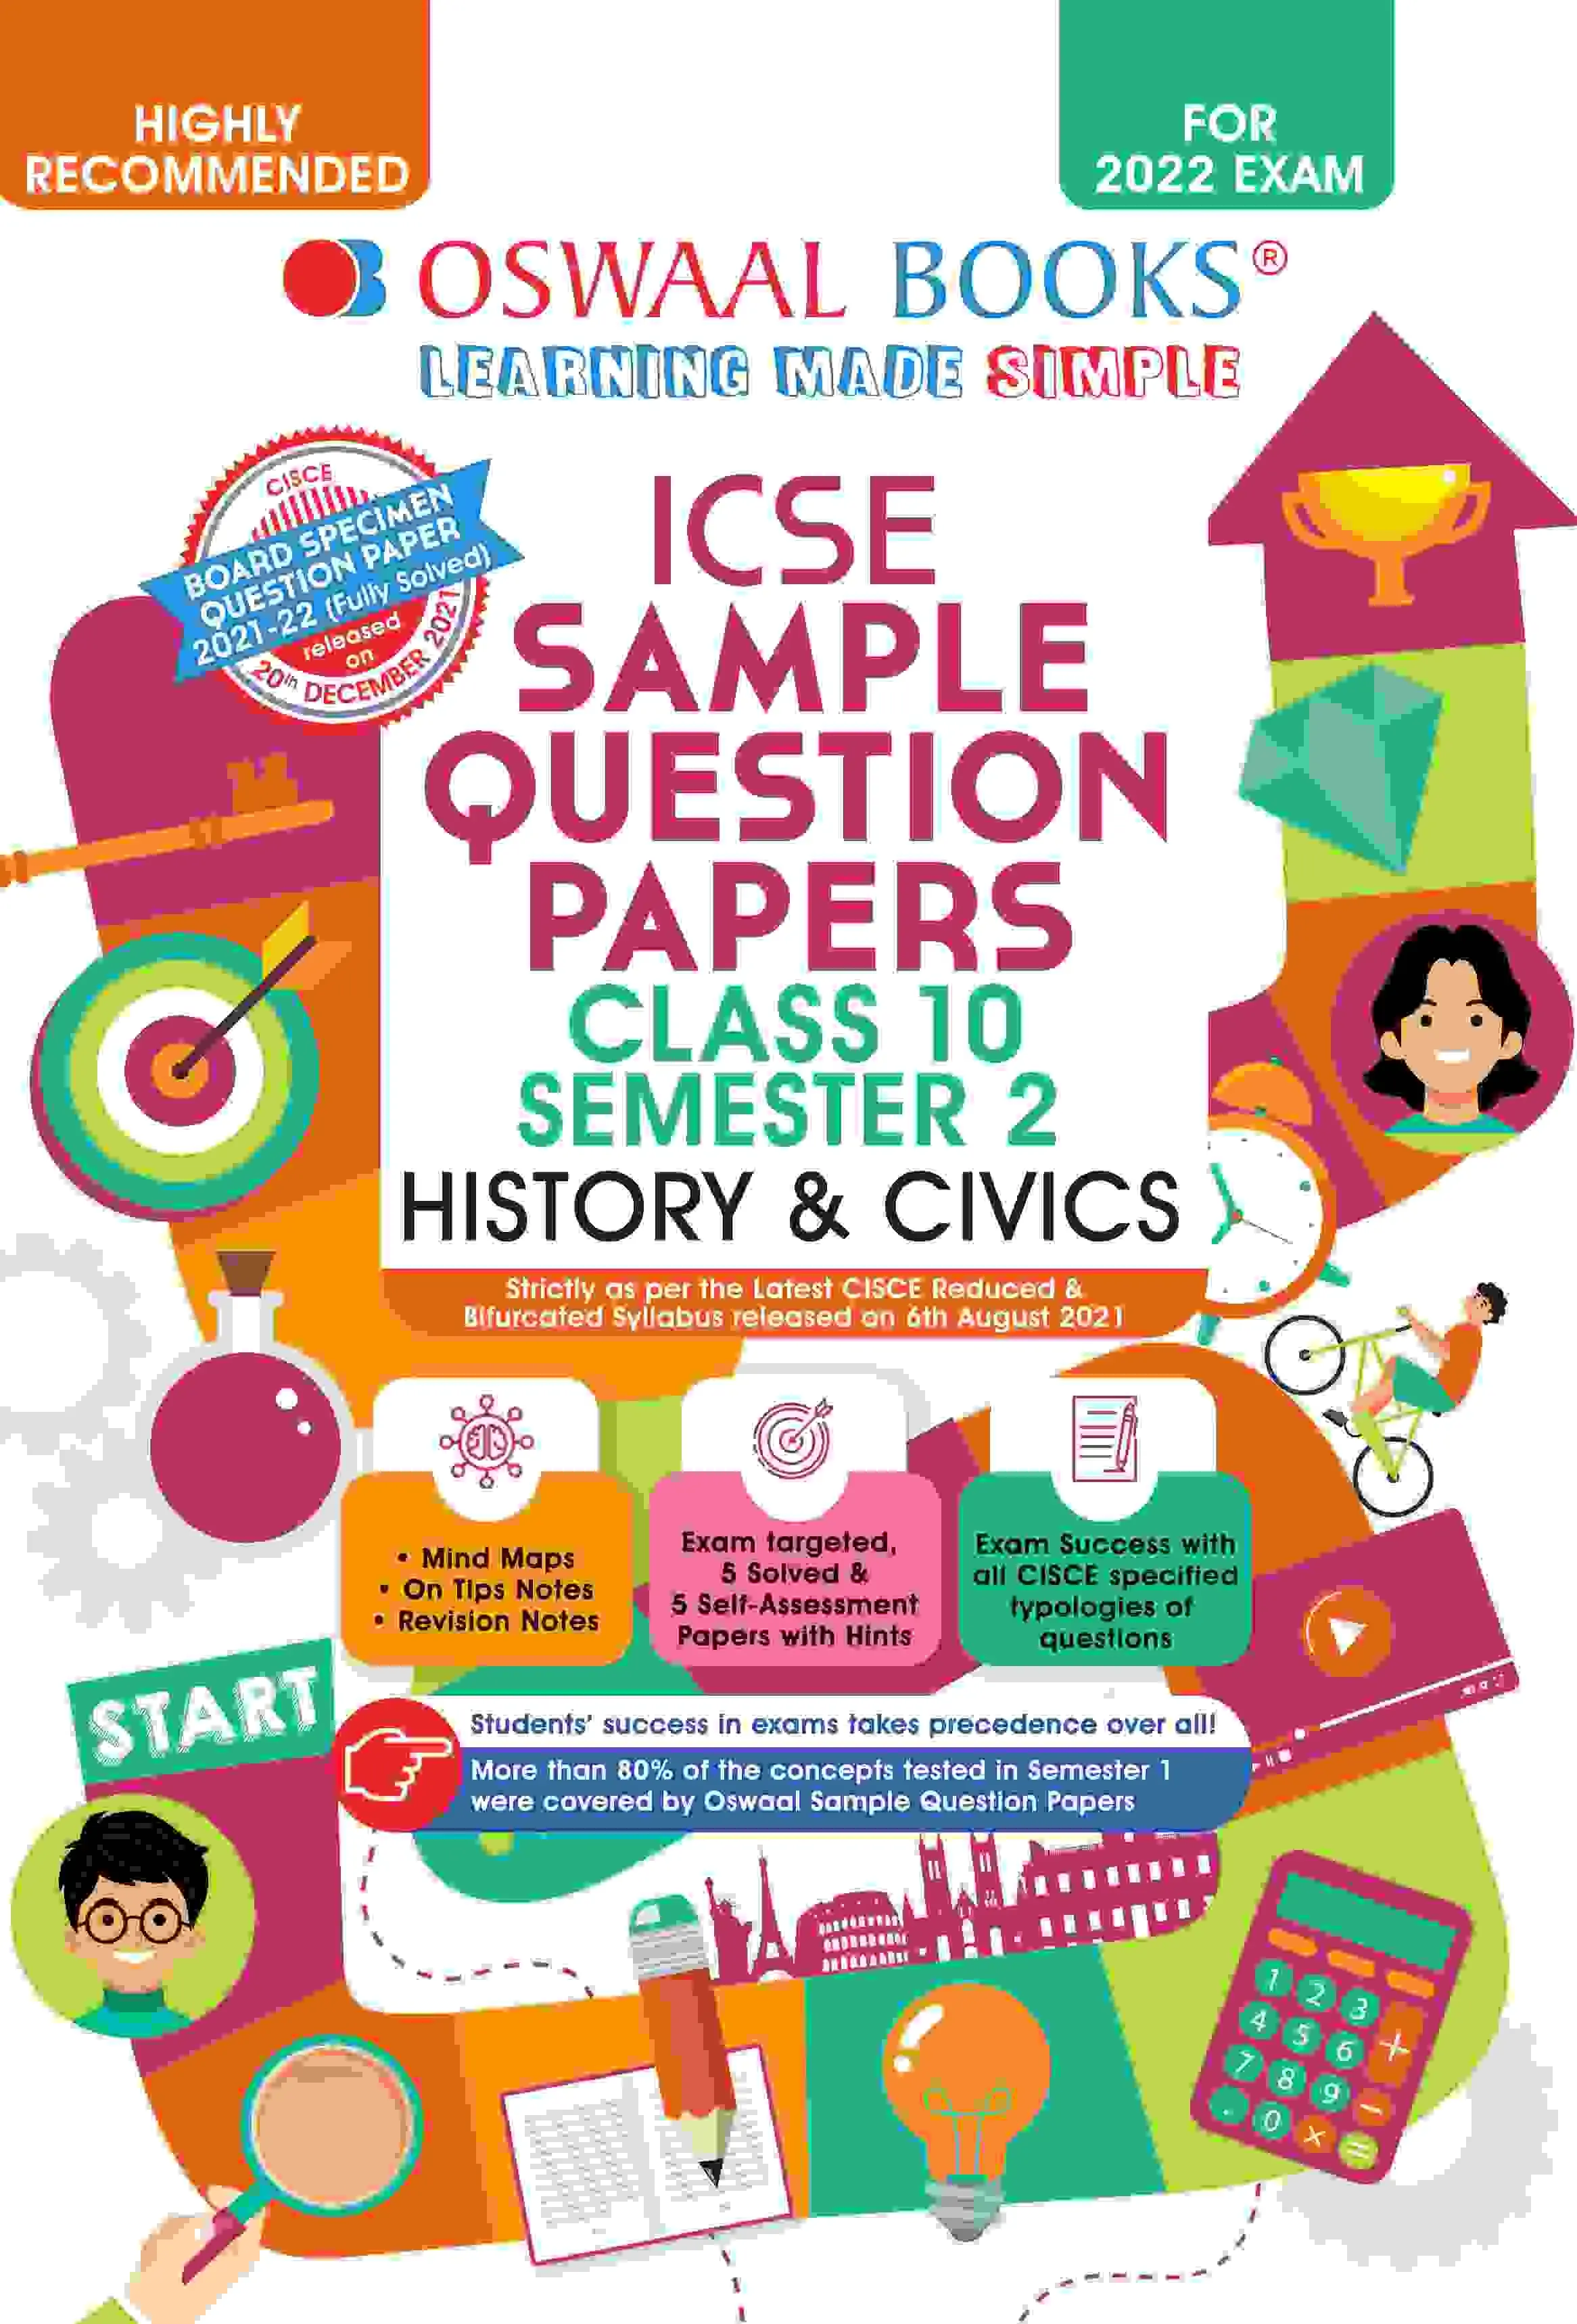 Oswaal ICSE Sample Question Papers Class 10, Semester 2, History & Civics Book (For 2022 Exam)